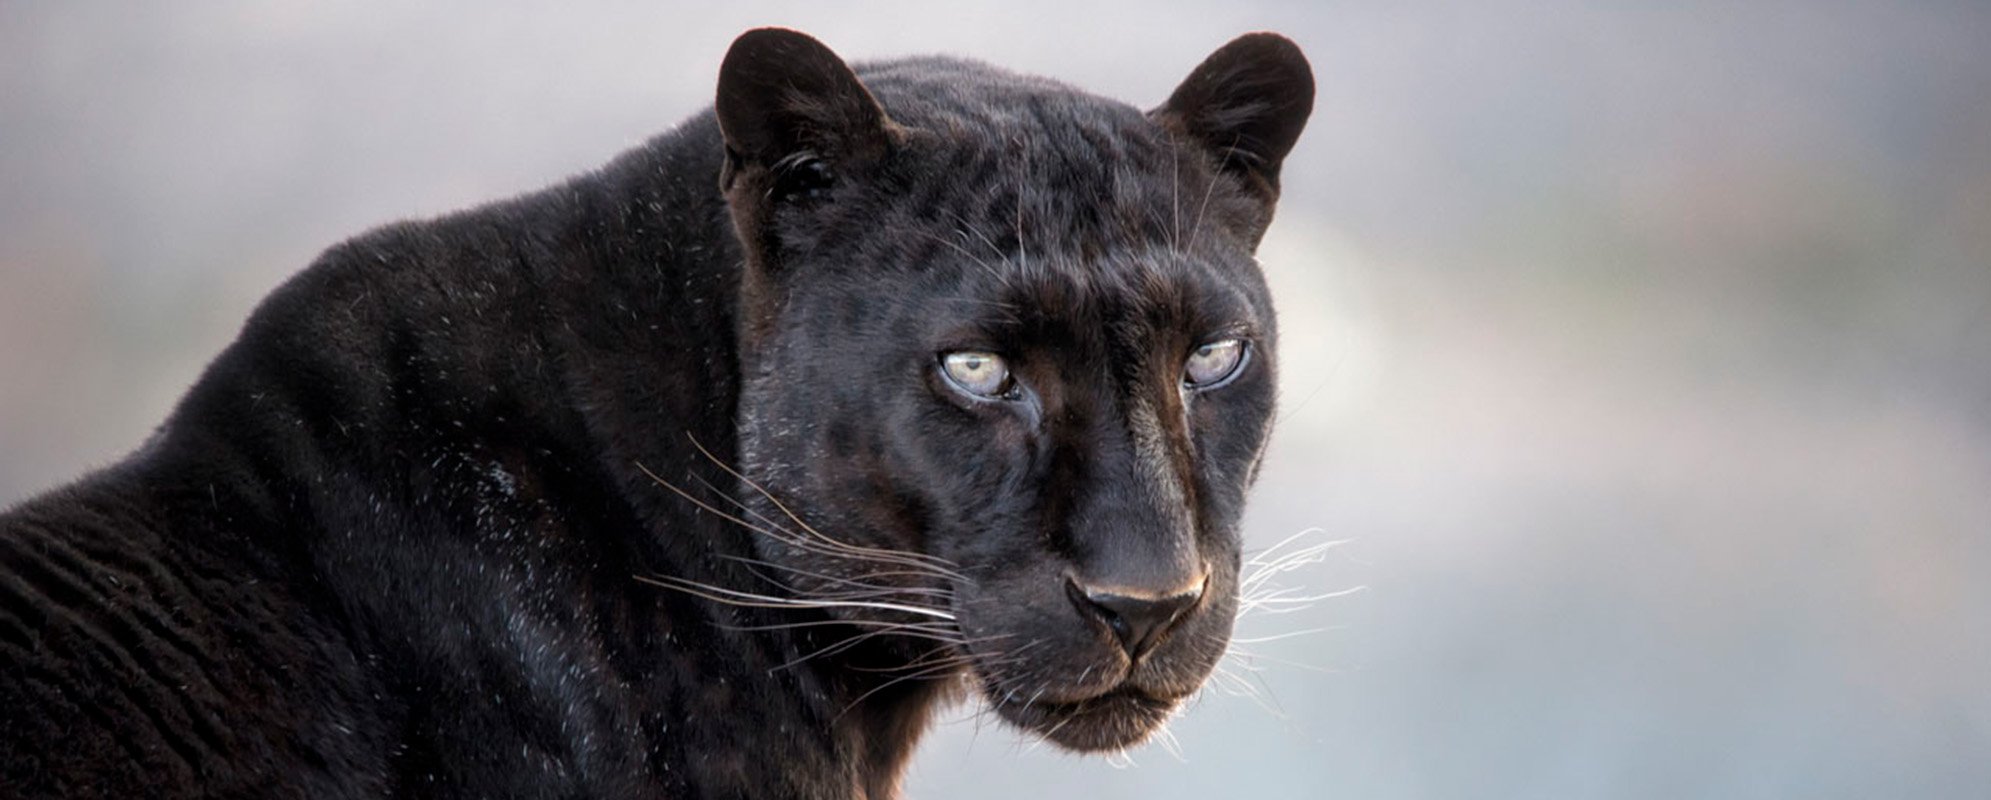 A black leopard staring out into the distance